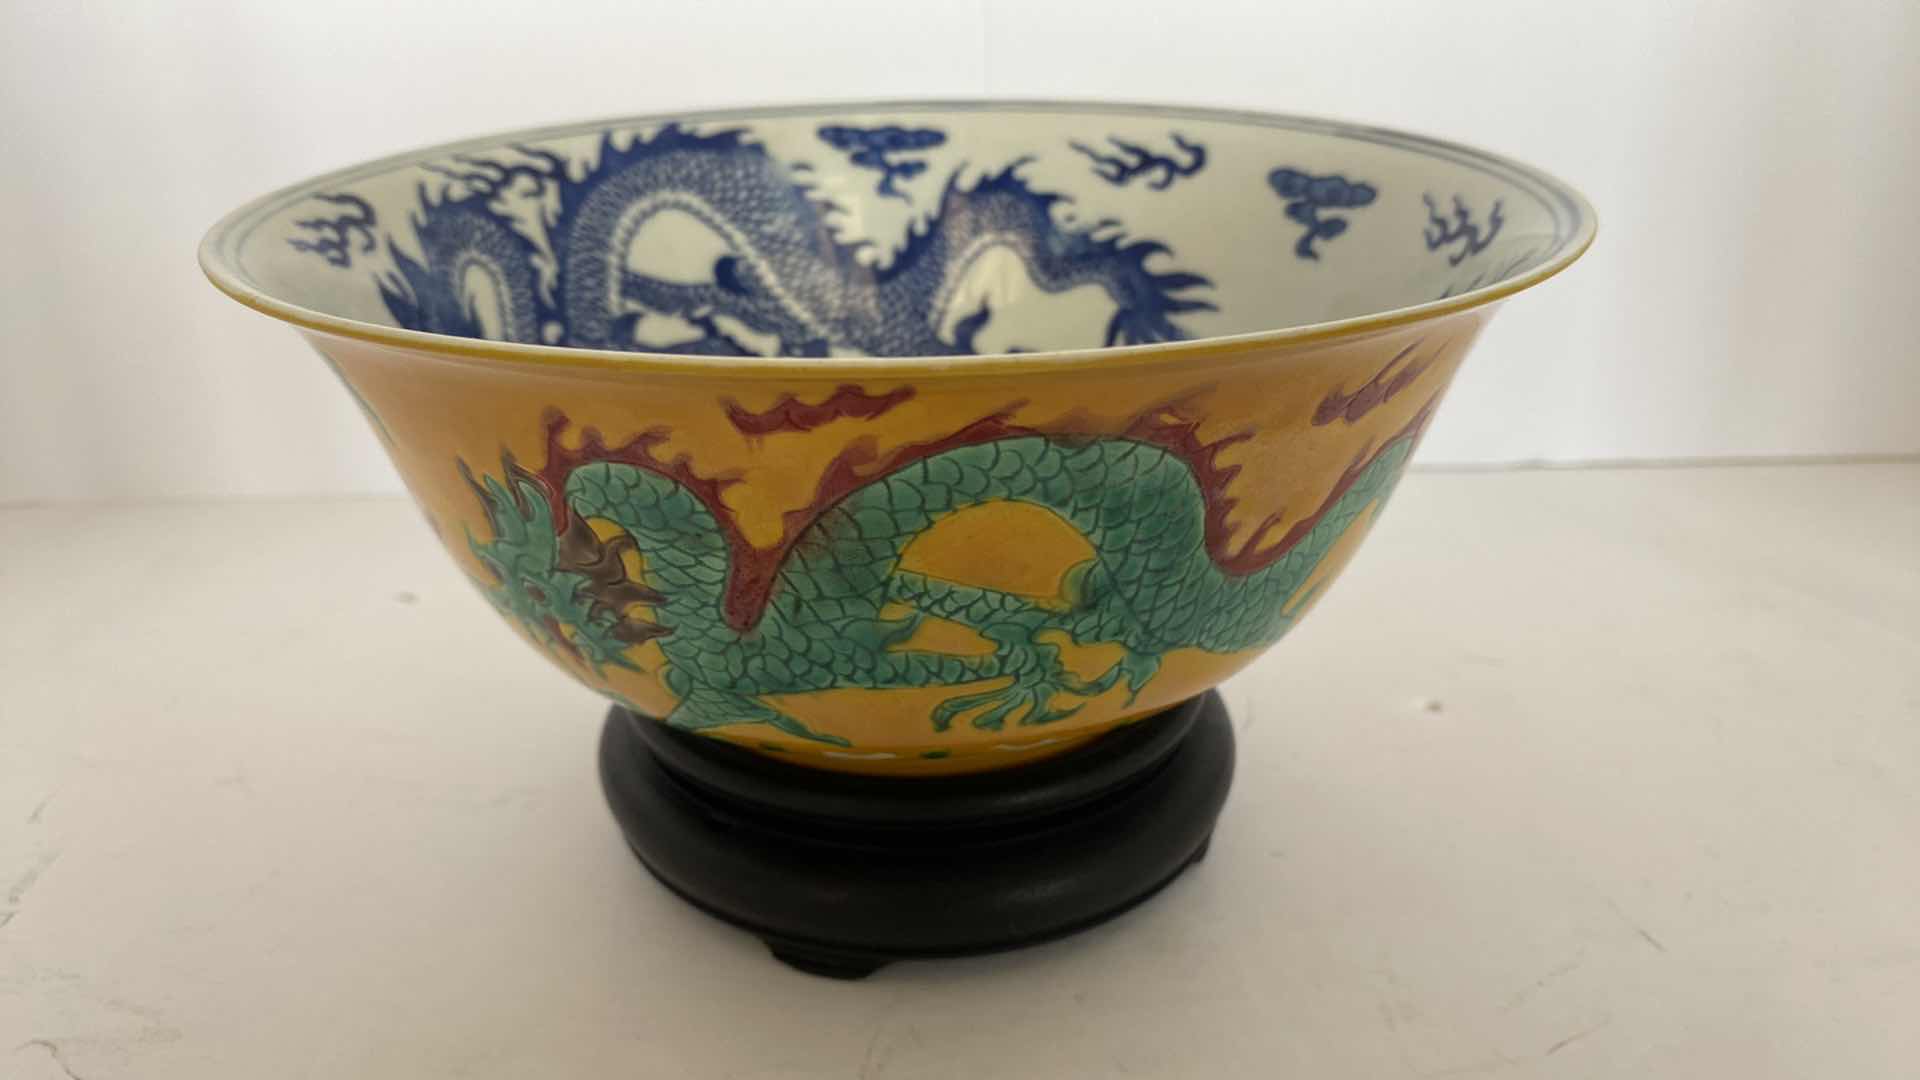 Photo 7 of REIN MARKS ON RARE KANGXI 1644 - 1912 YELLOW AND GREEN DRAGON WITH IMPERIAL BLUE DRAGON INTERIOR DIAMETER 8“ x 3“ ON STAND